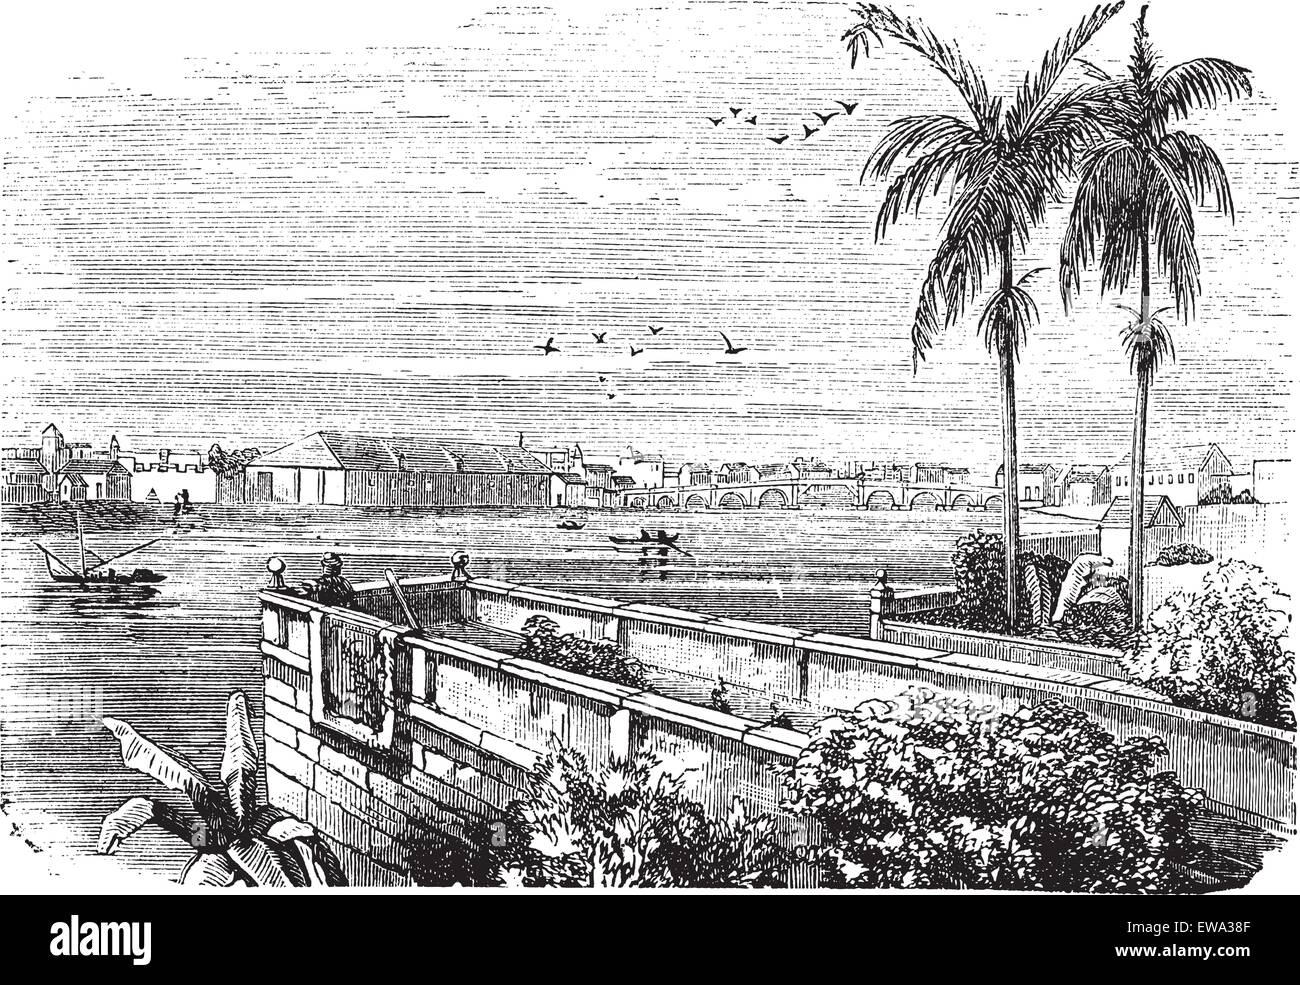 Manila or Pearl of the Orient or Queen of the Orient or the City of Our Affections or City by the Bay in Philippines, during the 1890s, vintage engraving. Old engraved illustration of Manila with Pasig River. Stock Vector